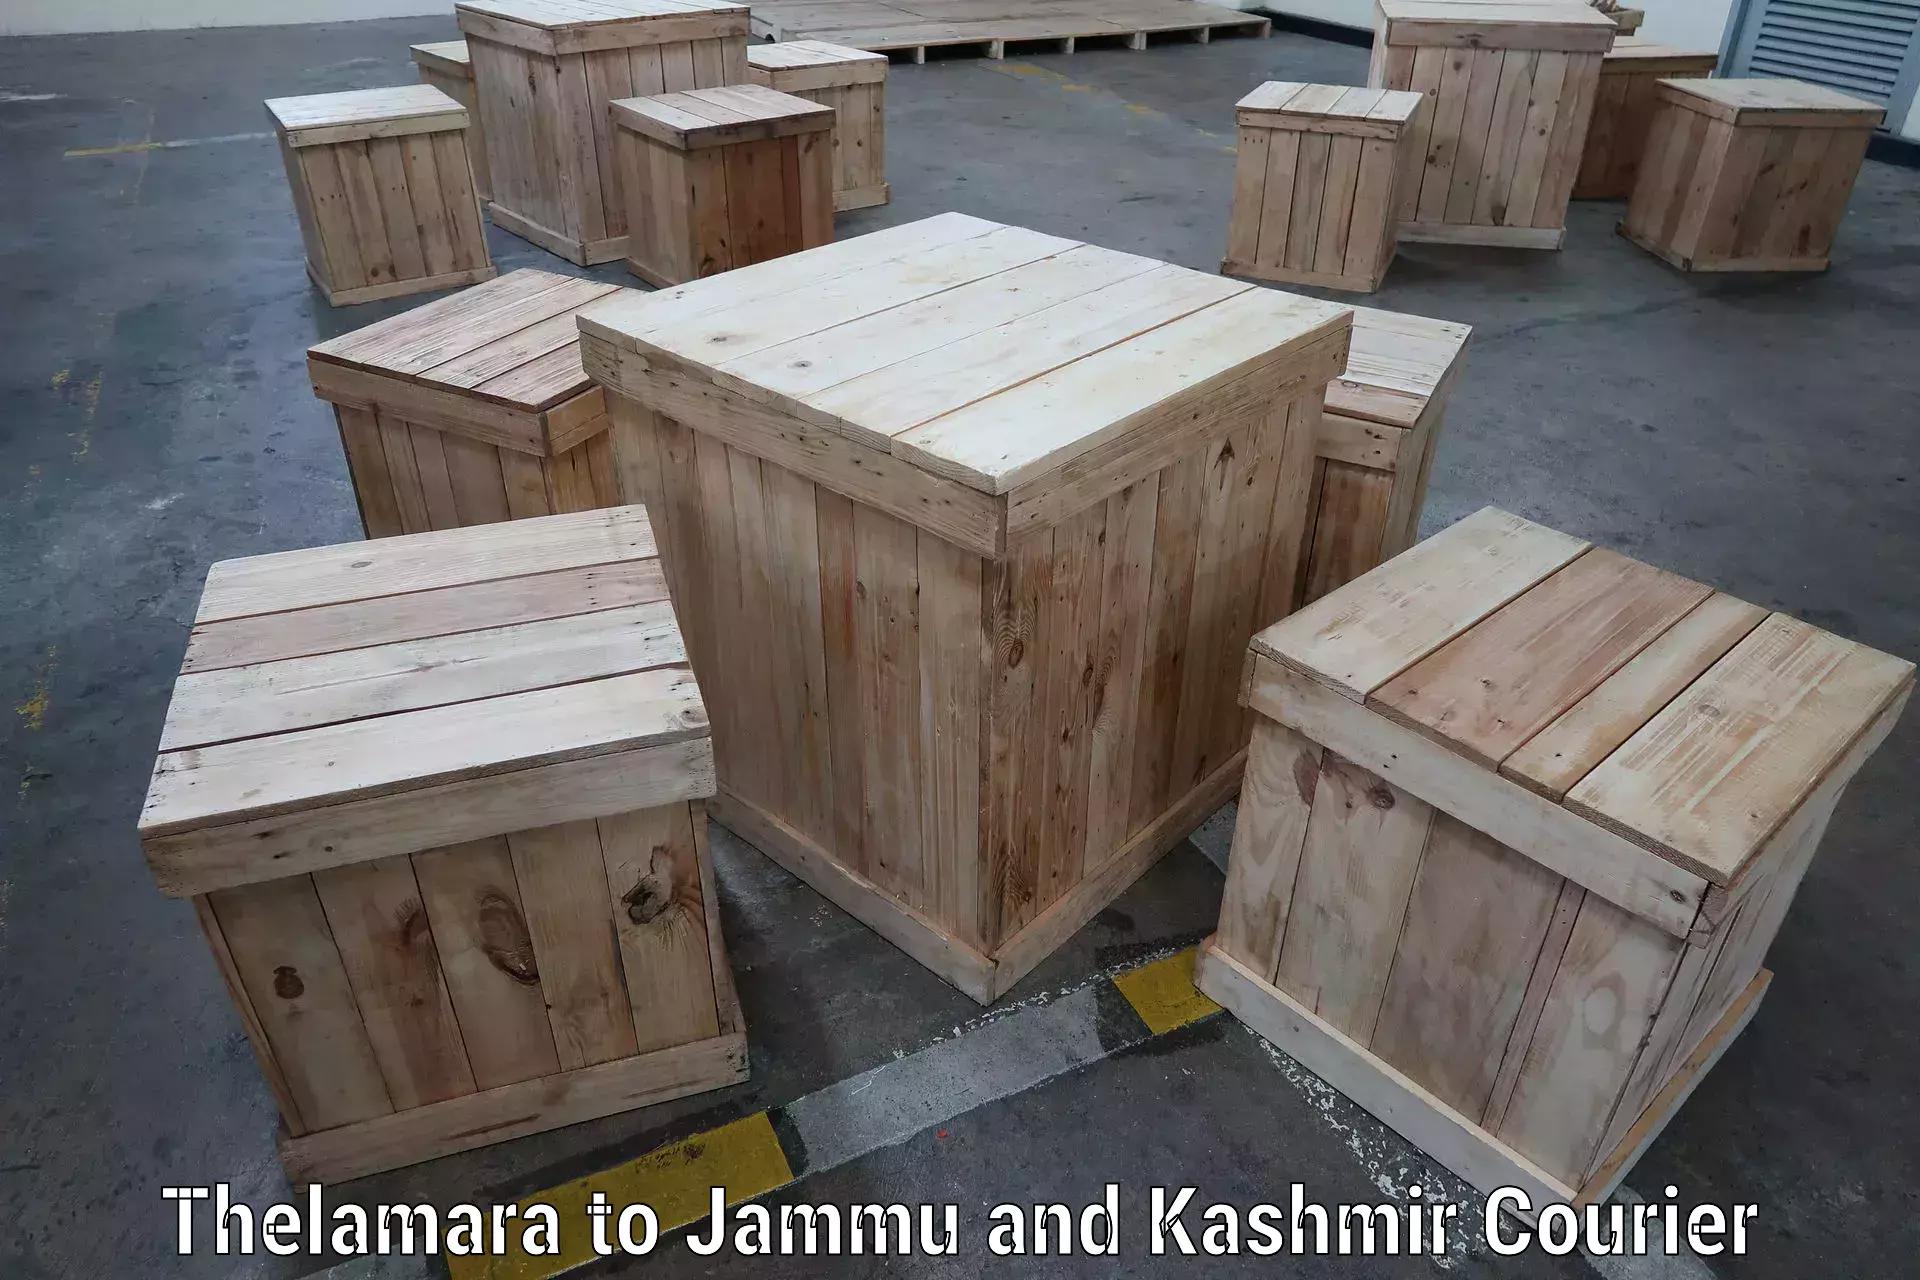 Express delivery solutions Thelamara to Jammu